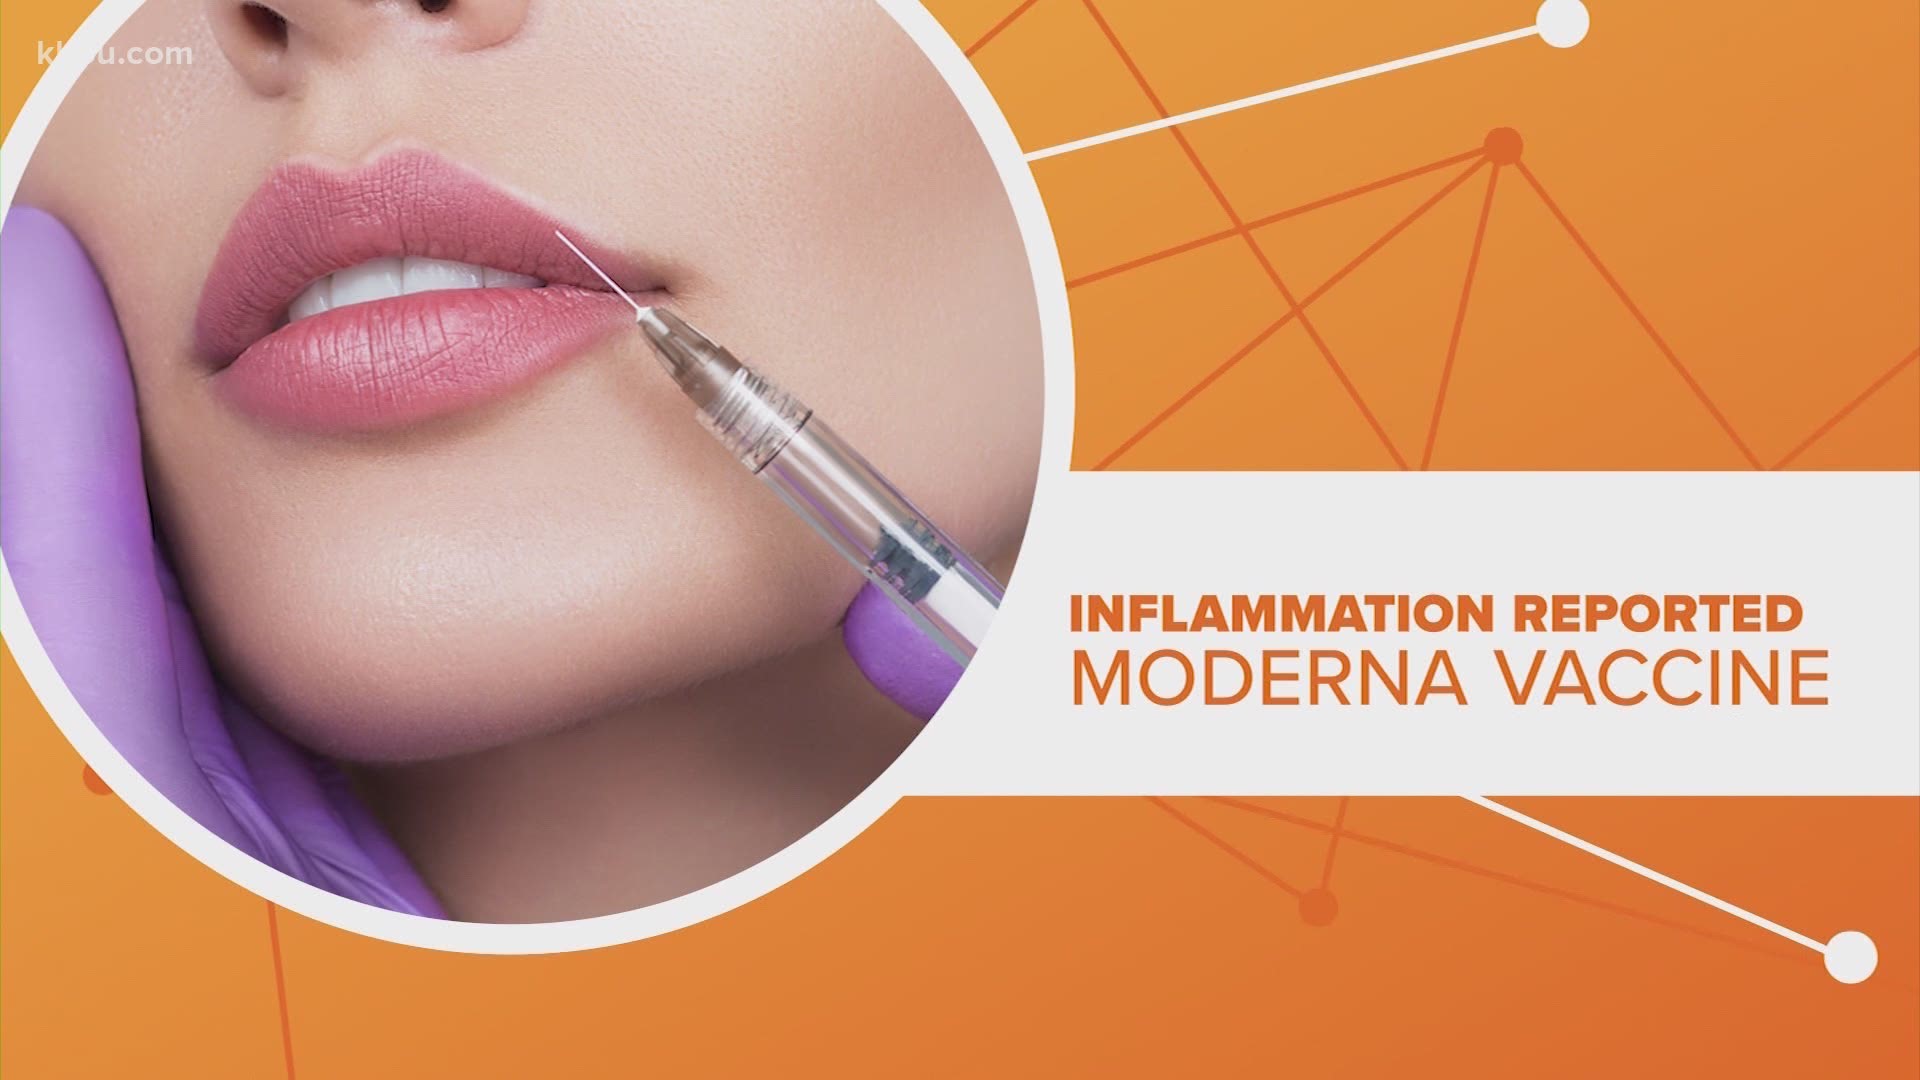 The FDA has a warning about an unusual side effect for the Moderna coronavirus vaccine for patients with cosmetic facial fillers. Let’s connect the dots.